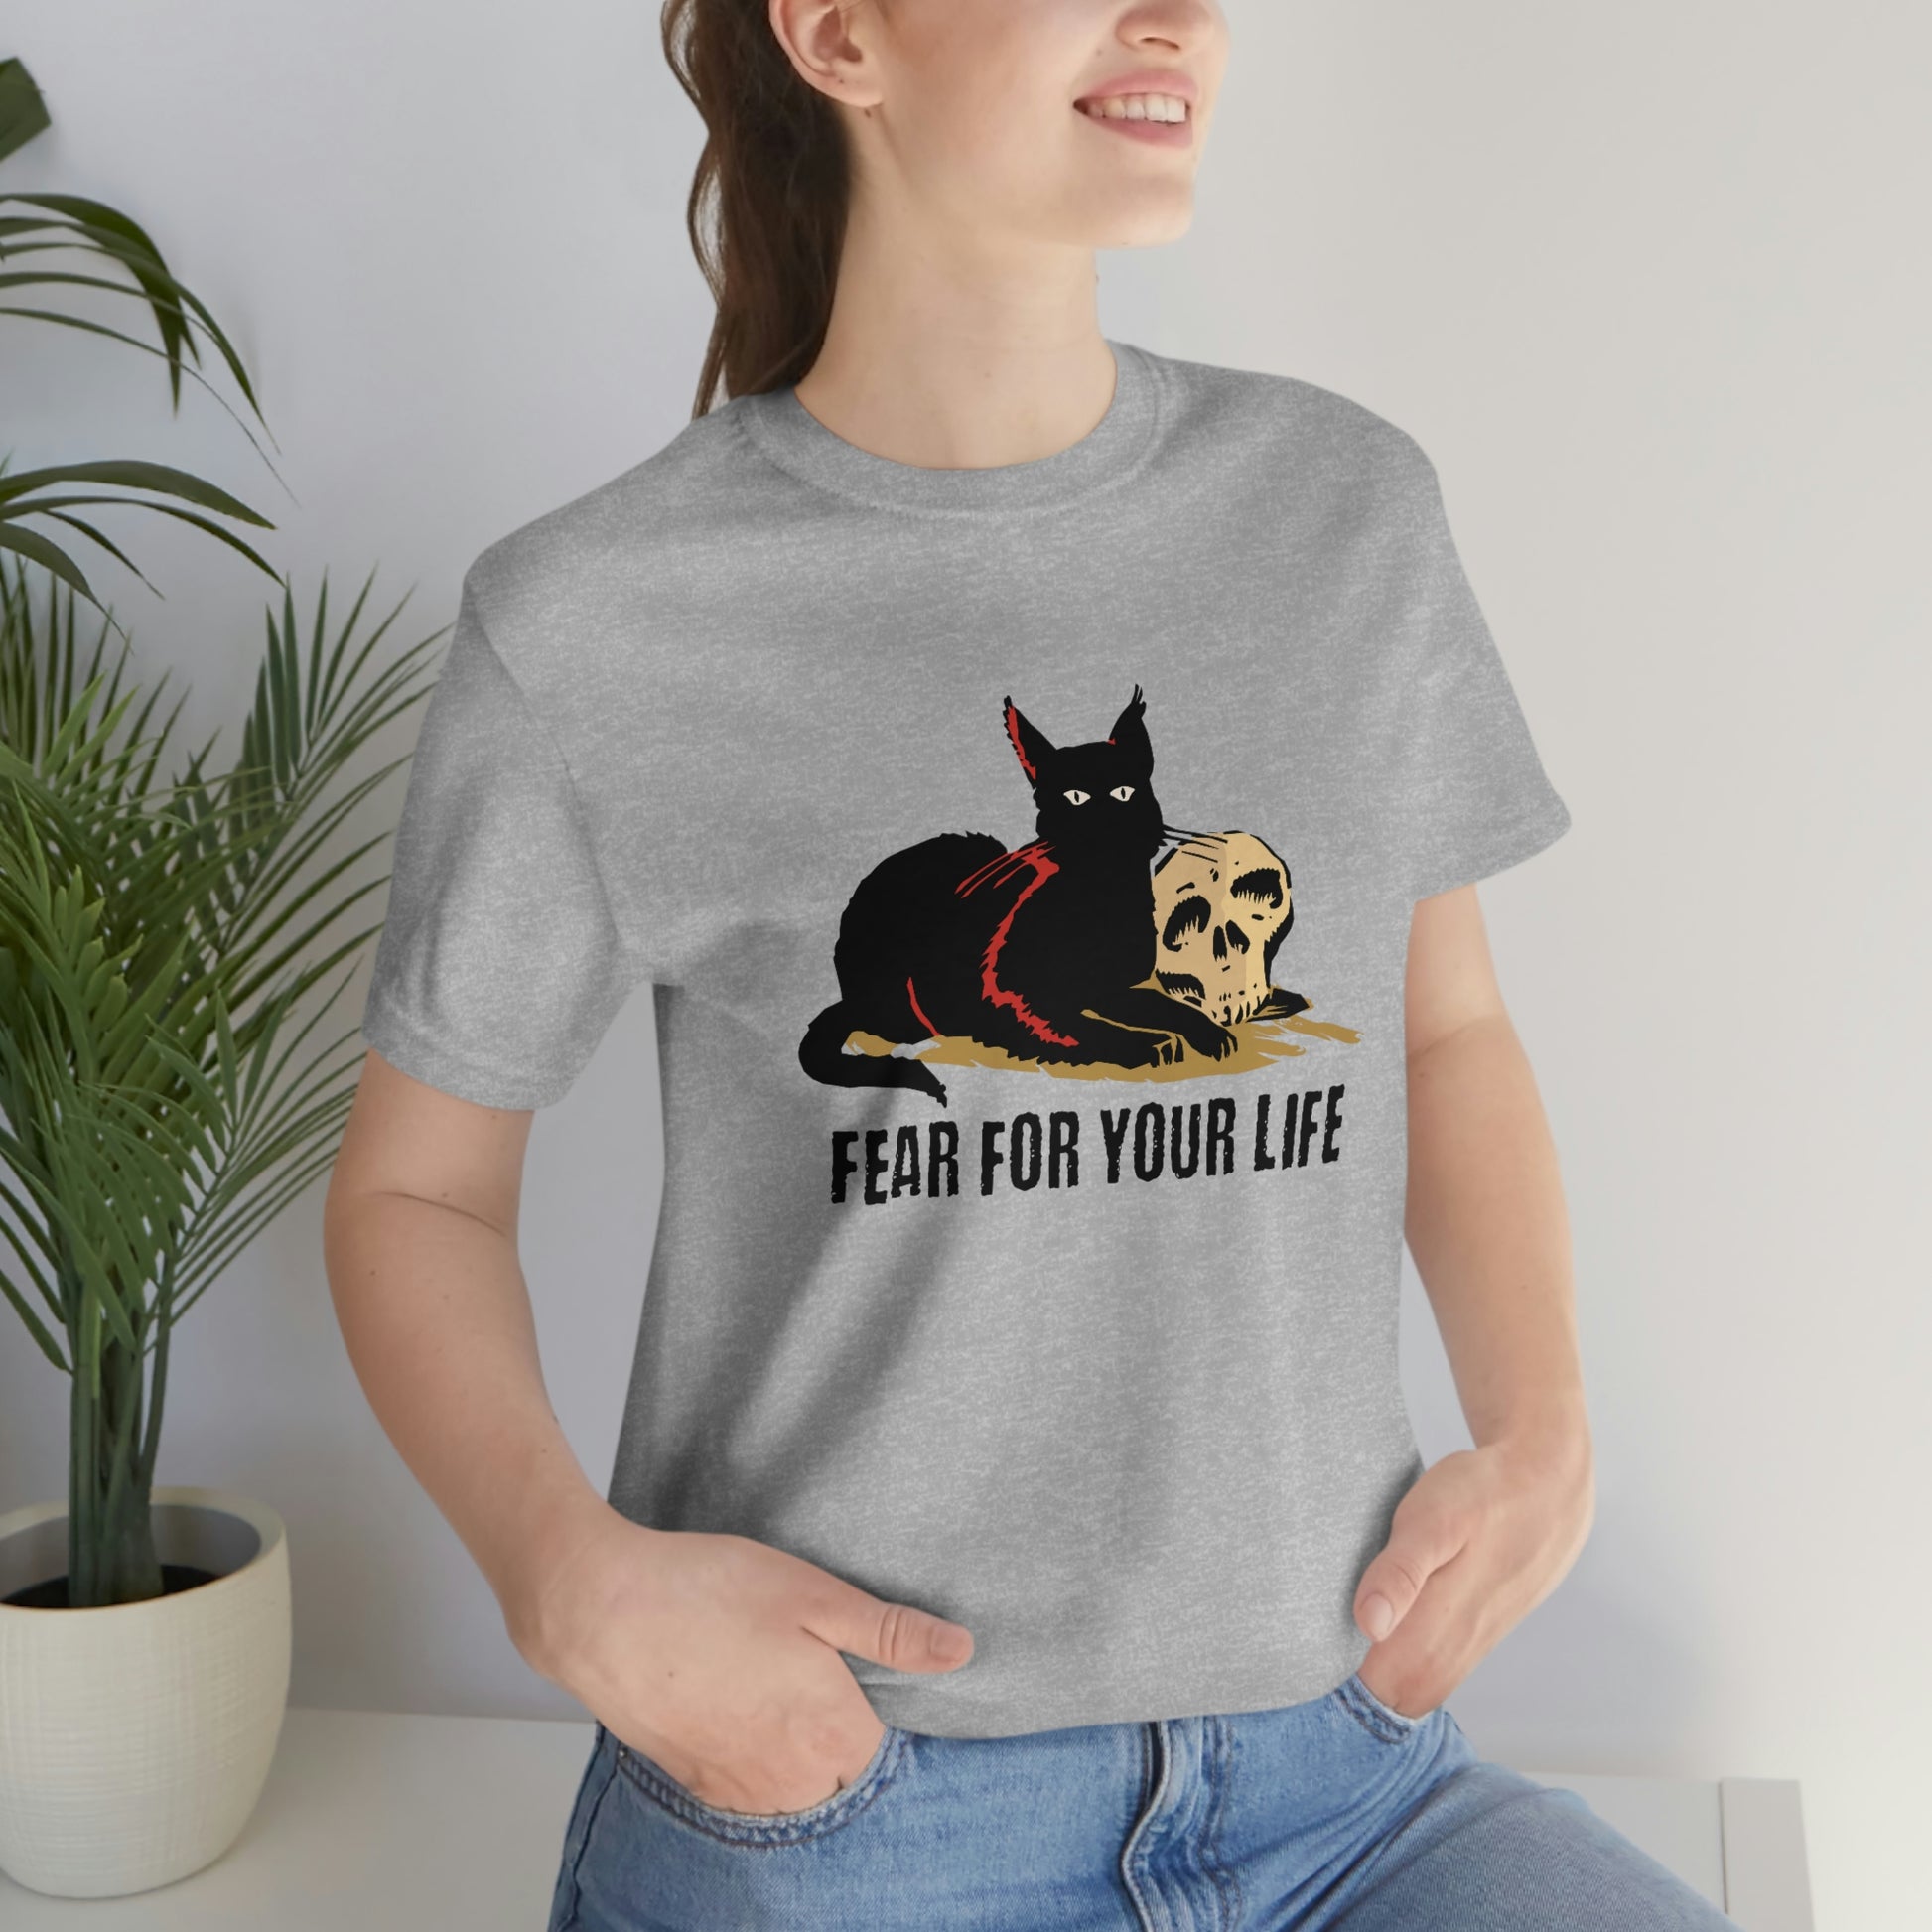 Black cat says fear for your life t shirt, funny black cat shirt, sarcastic cat tshirt, creepy cat tee, Spooky shirt, funny cat themed shirt